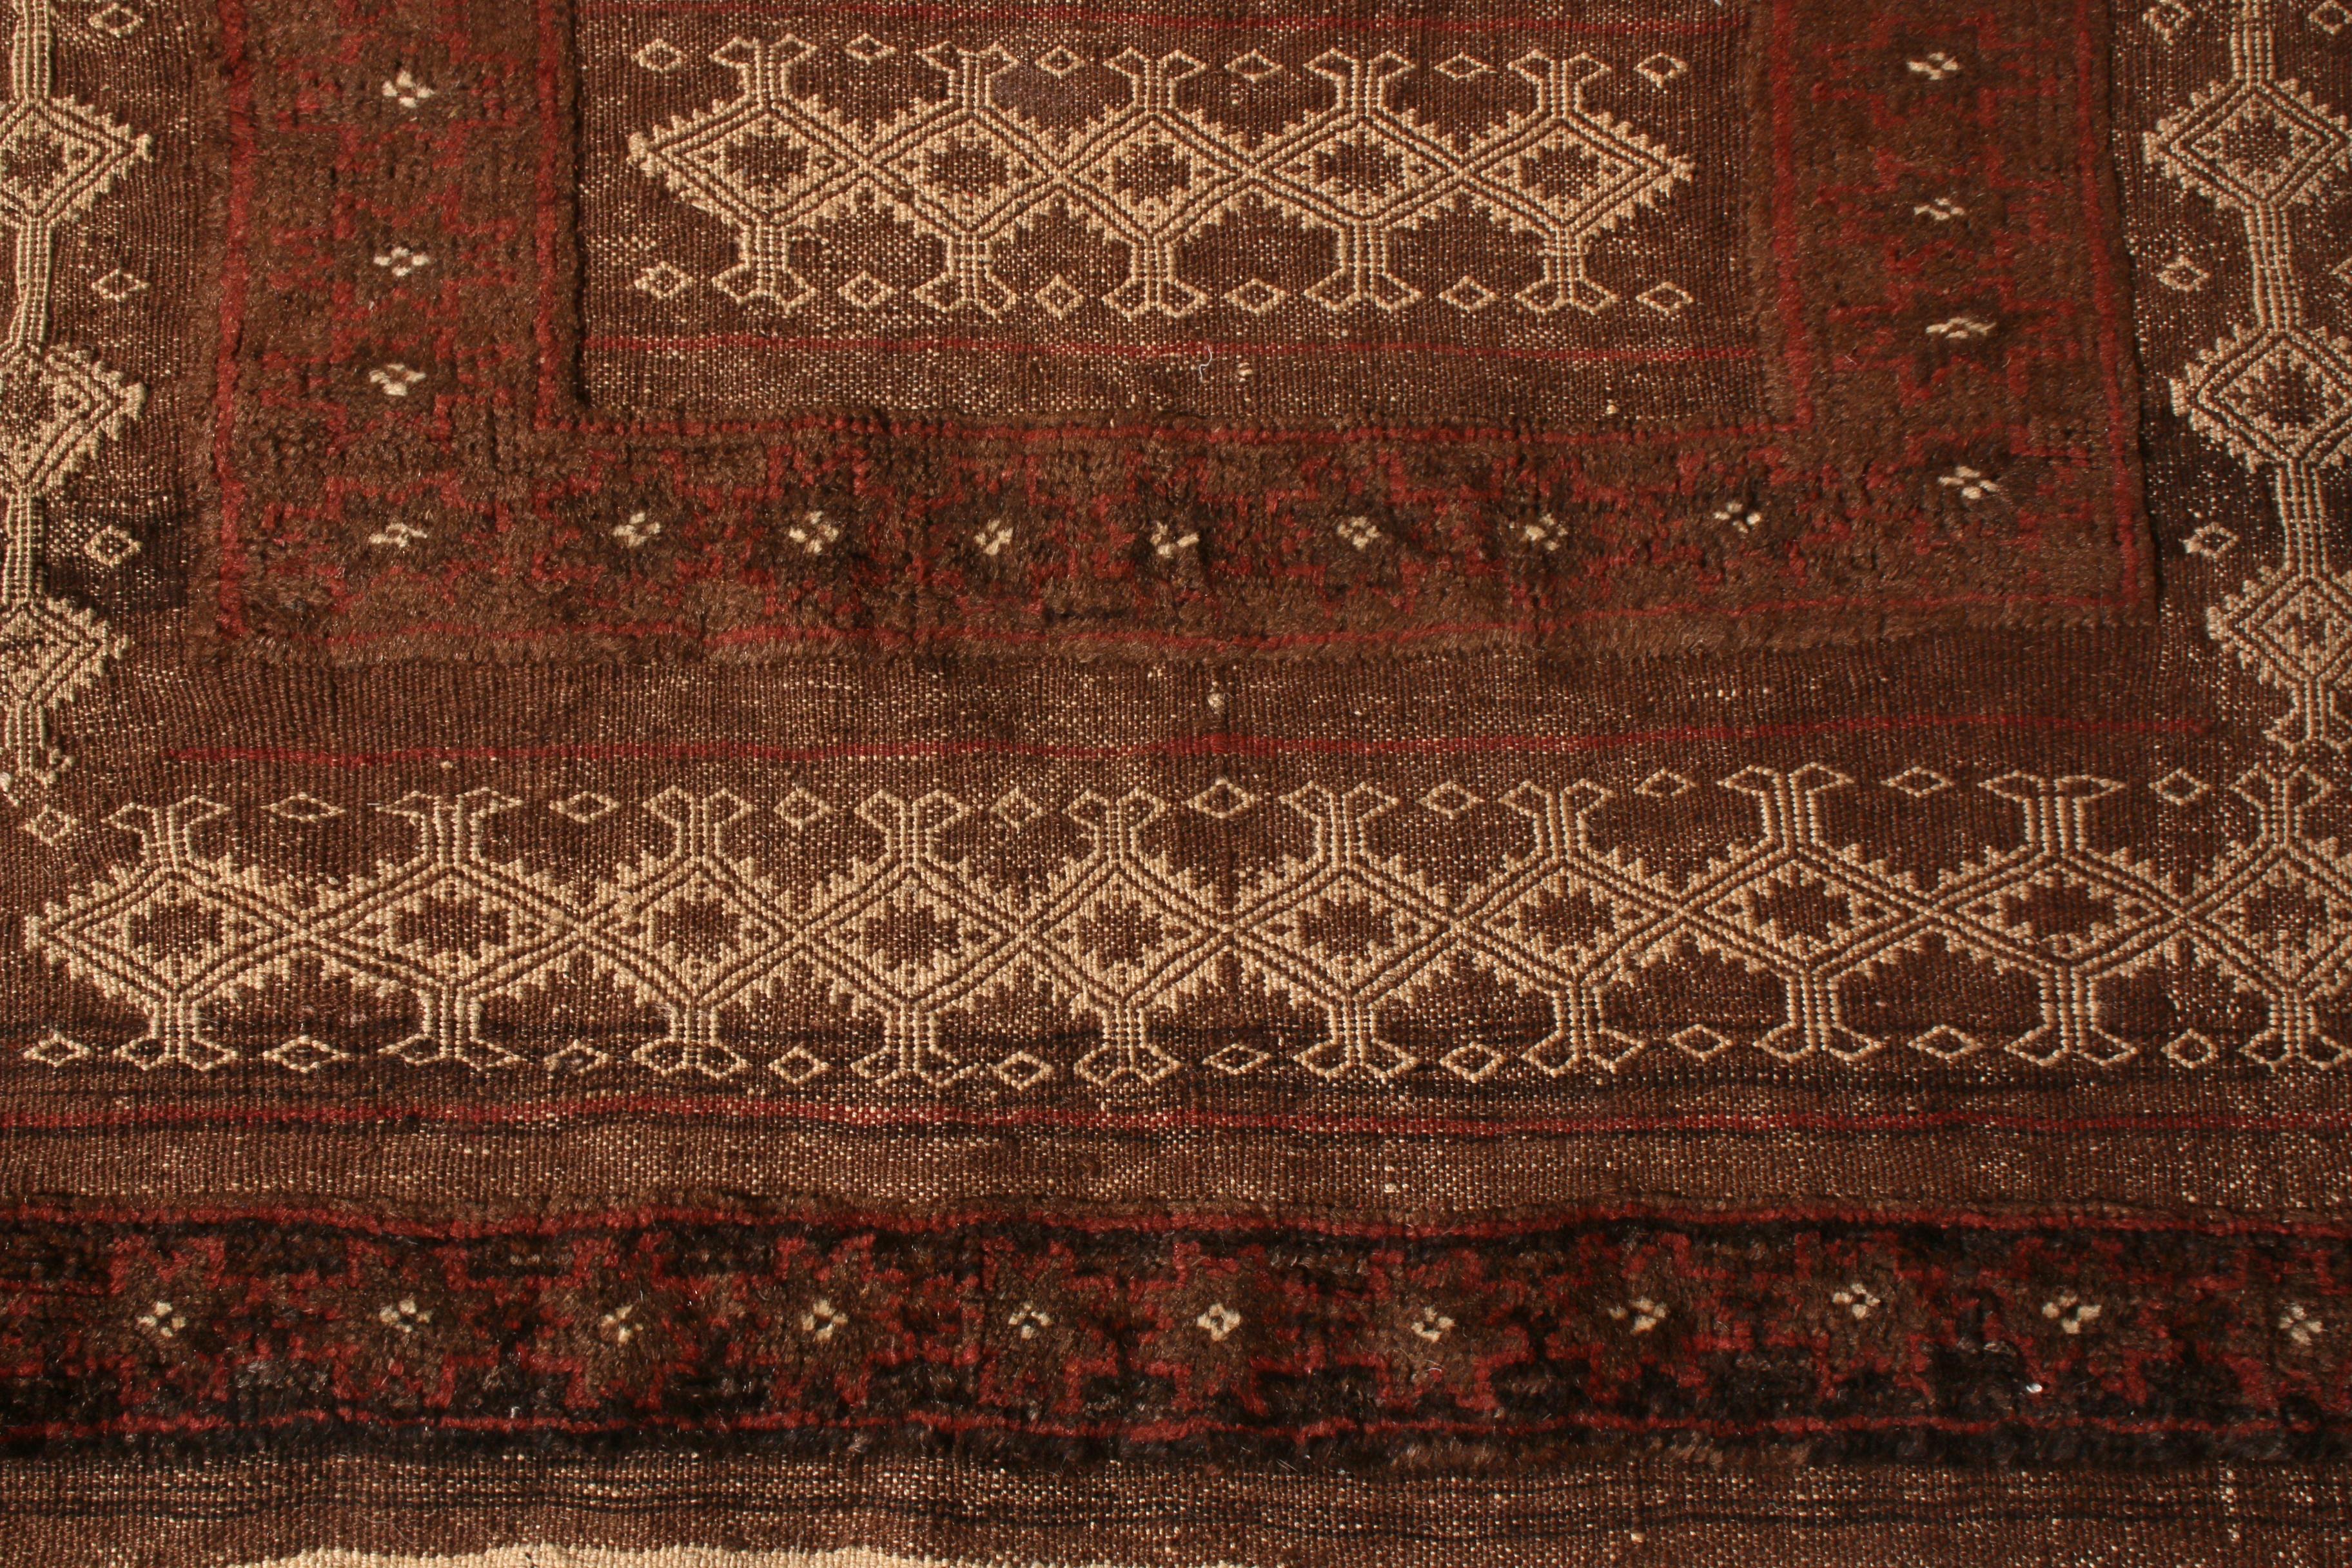 Afghan Handwoven Vintage Kilim Brown Beige and Red Traditional Flat-Weave